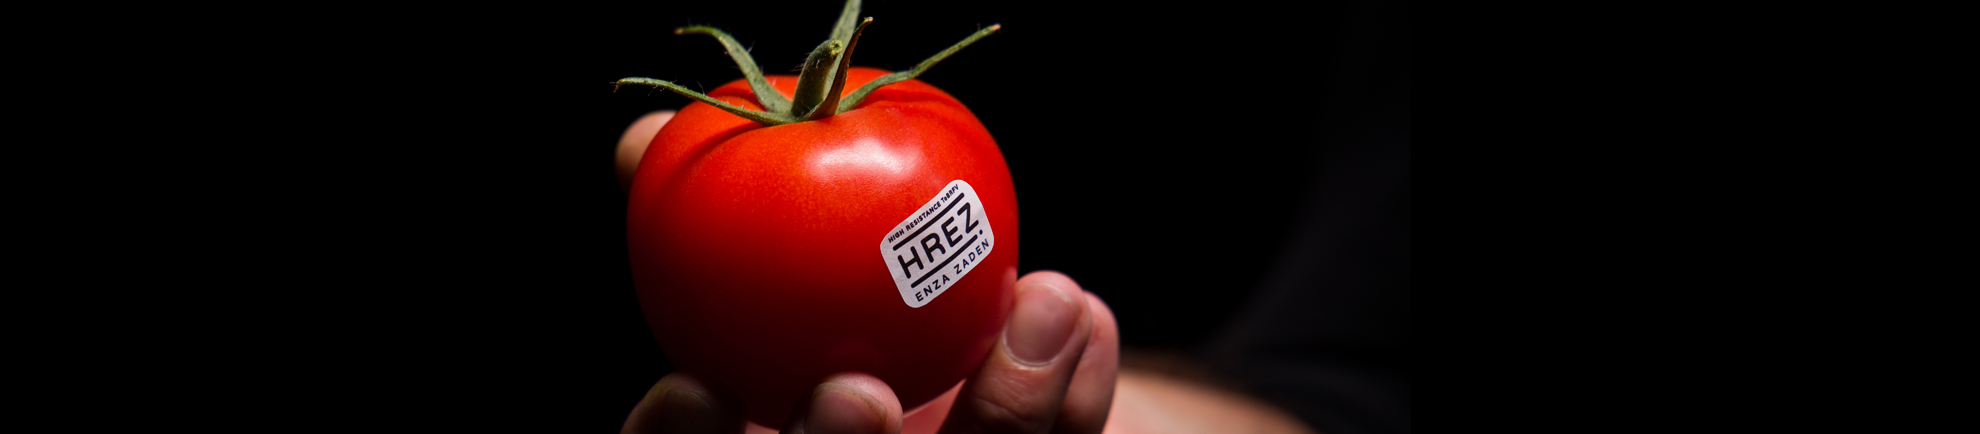 Tomato with label HREZ sticked to it, in a hand